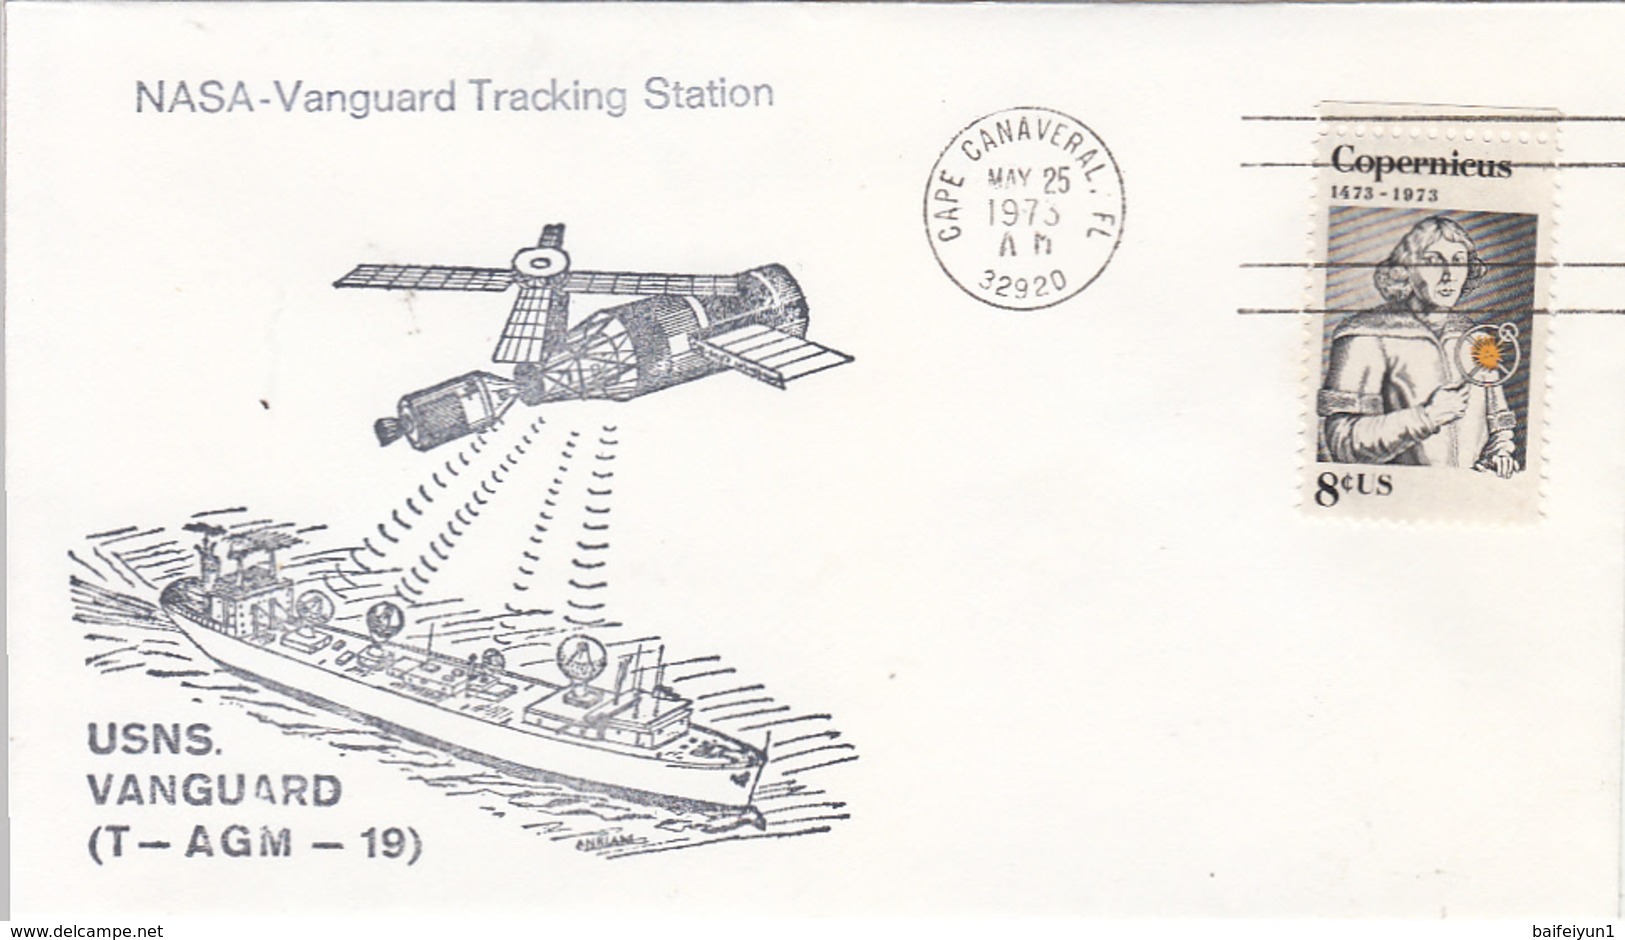 1973 USA  Space Station Skylab-2 VANGUARD Tracking Station Commemorative Cover - North  America